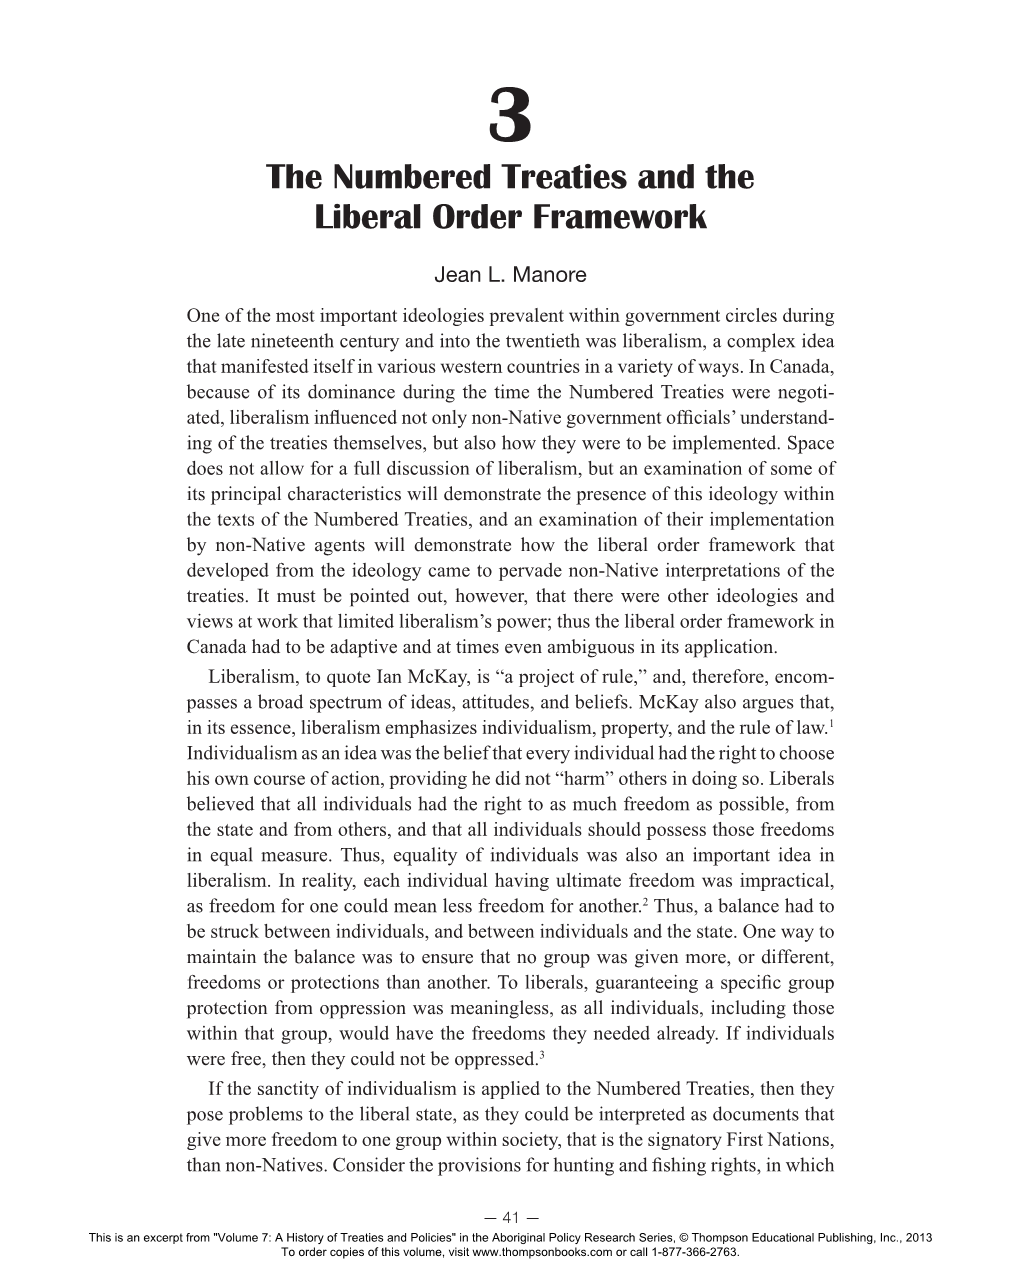 3. the Numbered Treaties and the Liberal Order Framework